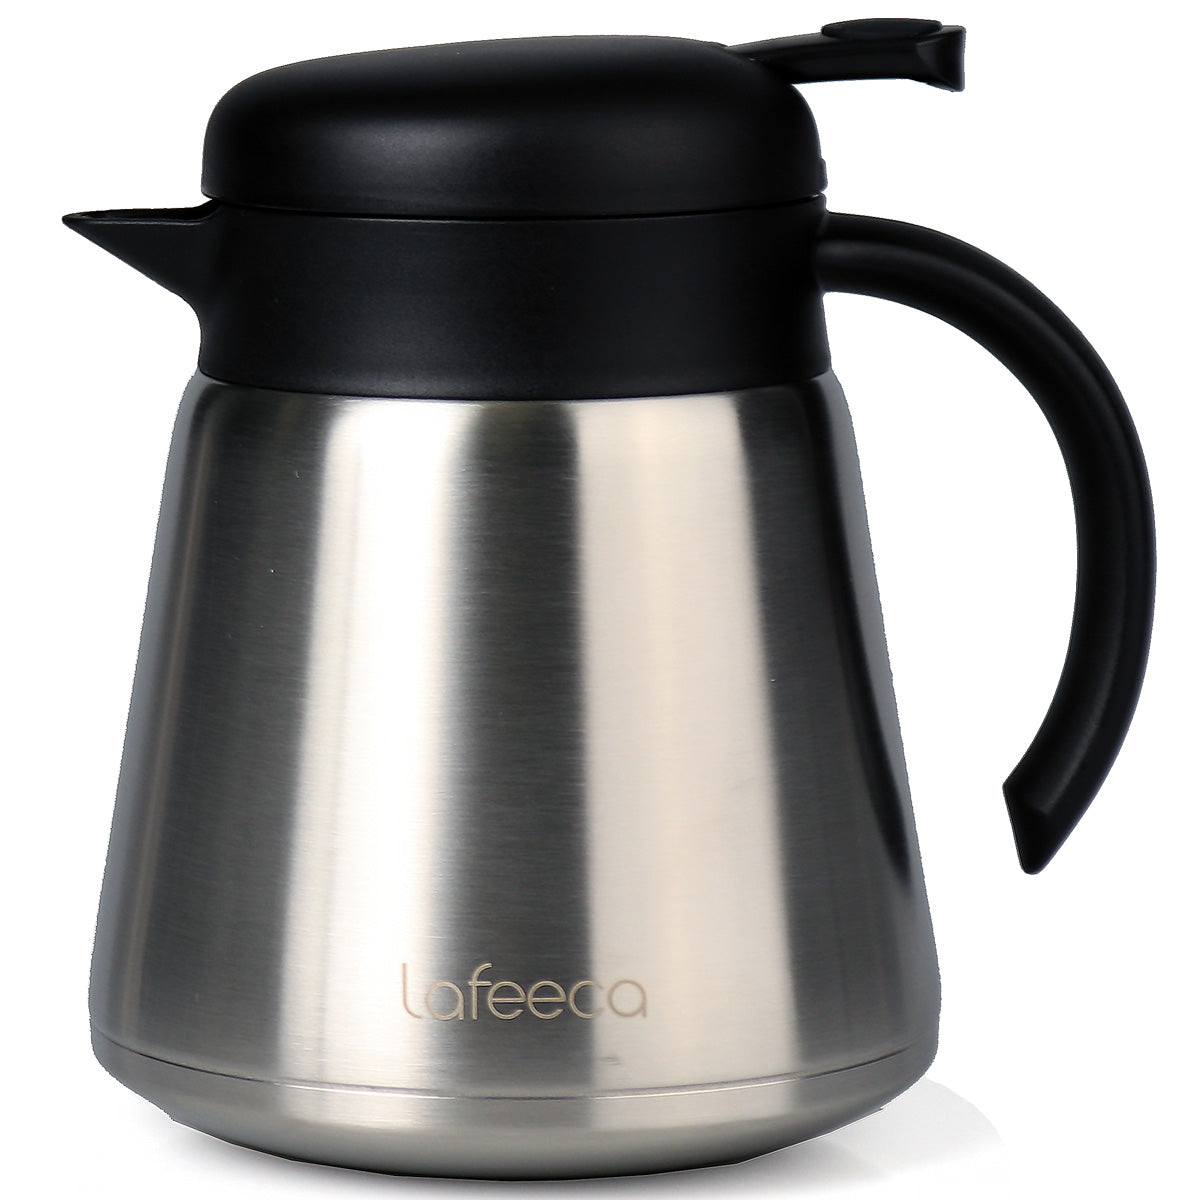 Thermal Carafe - Hot Coffee All Day